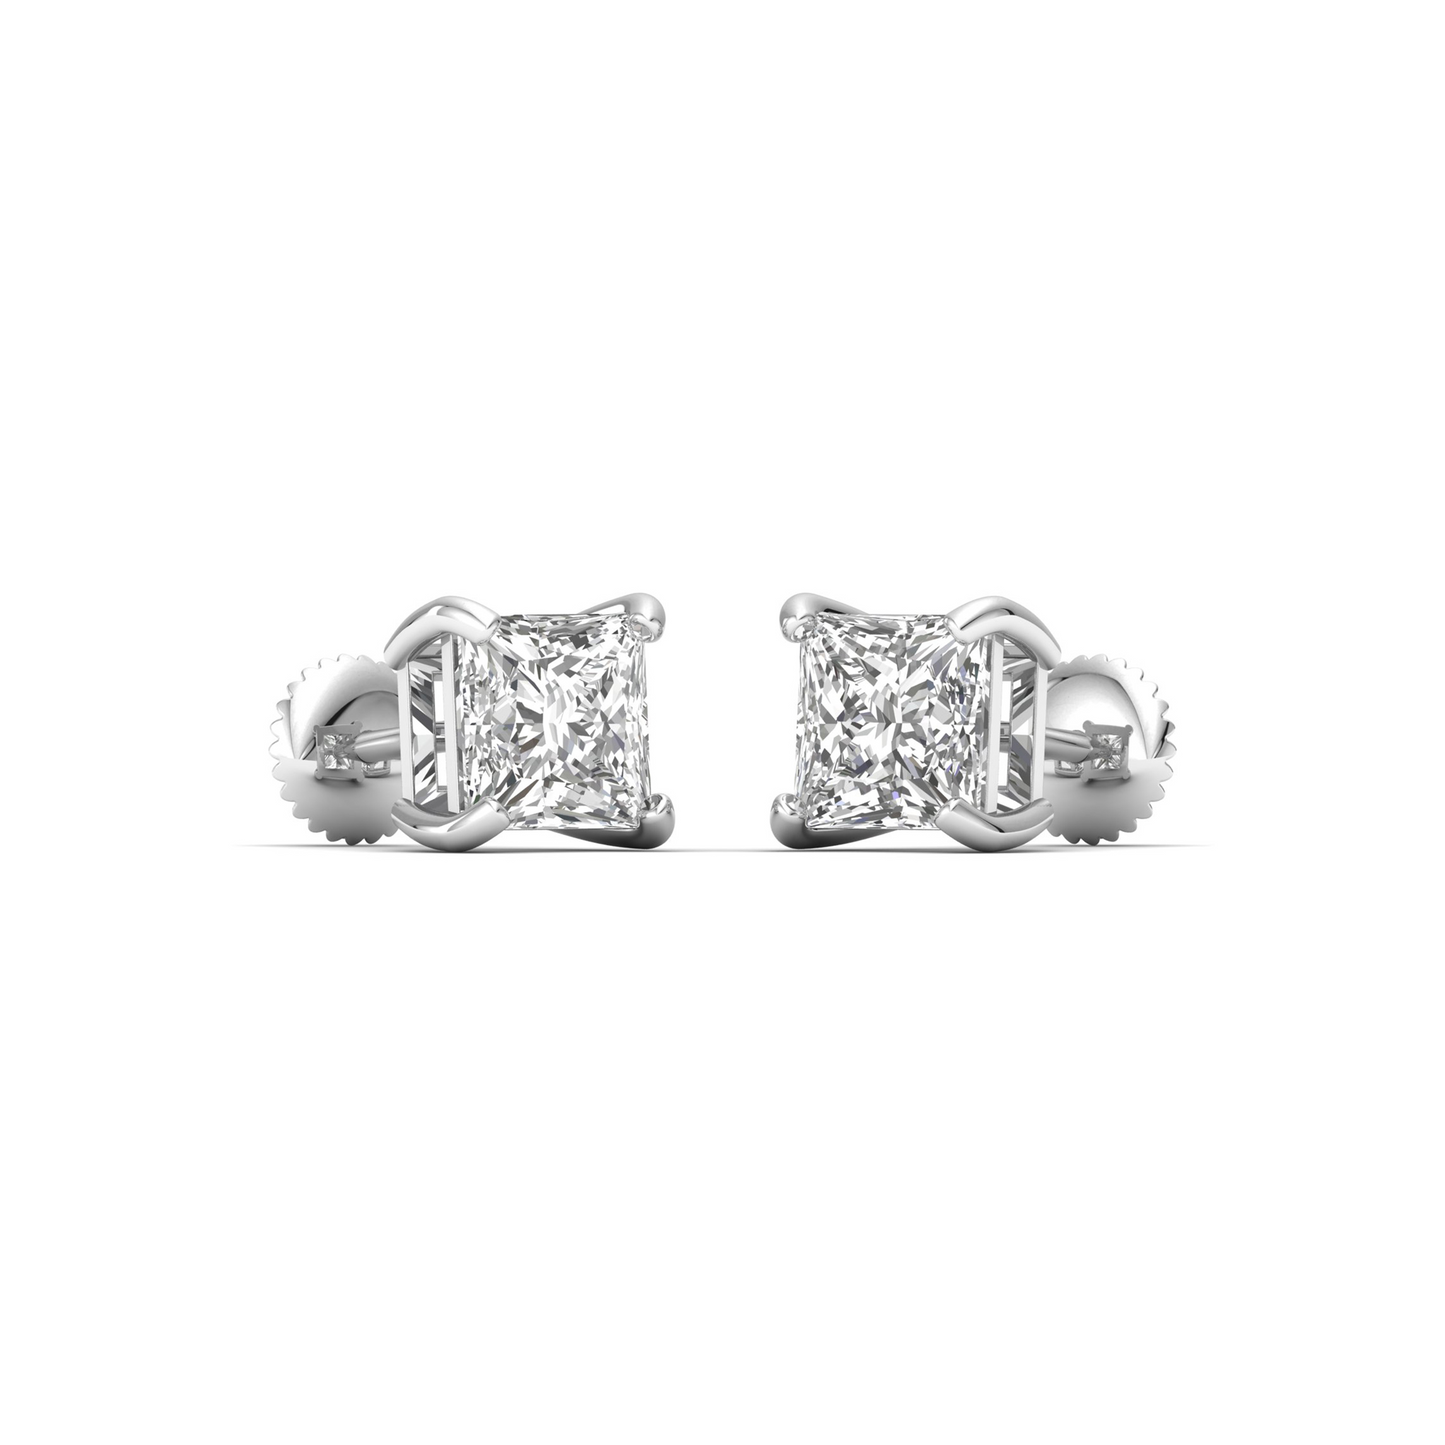 Regal Radiance: Adorn Yourself with Royalty in our Princess-Cut Diamond Earring